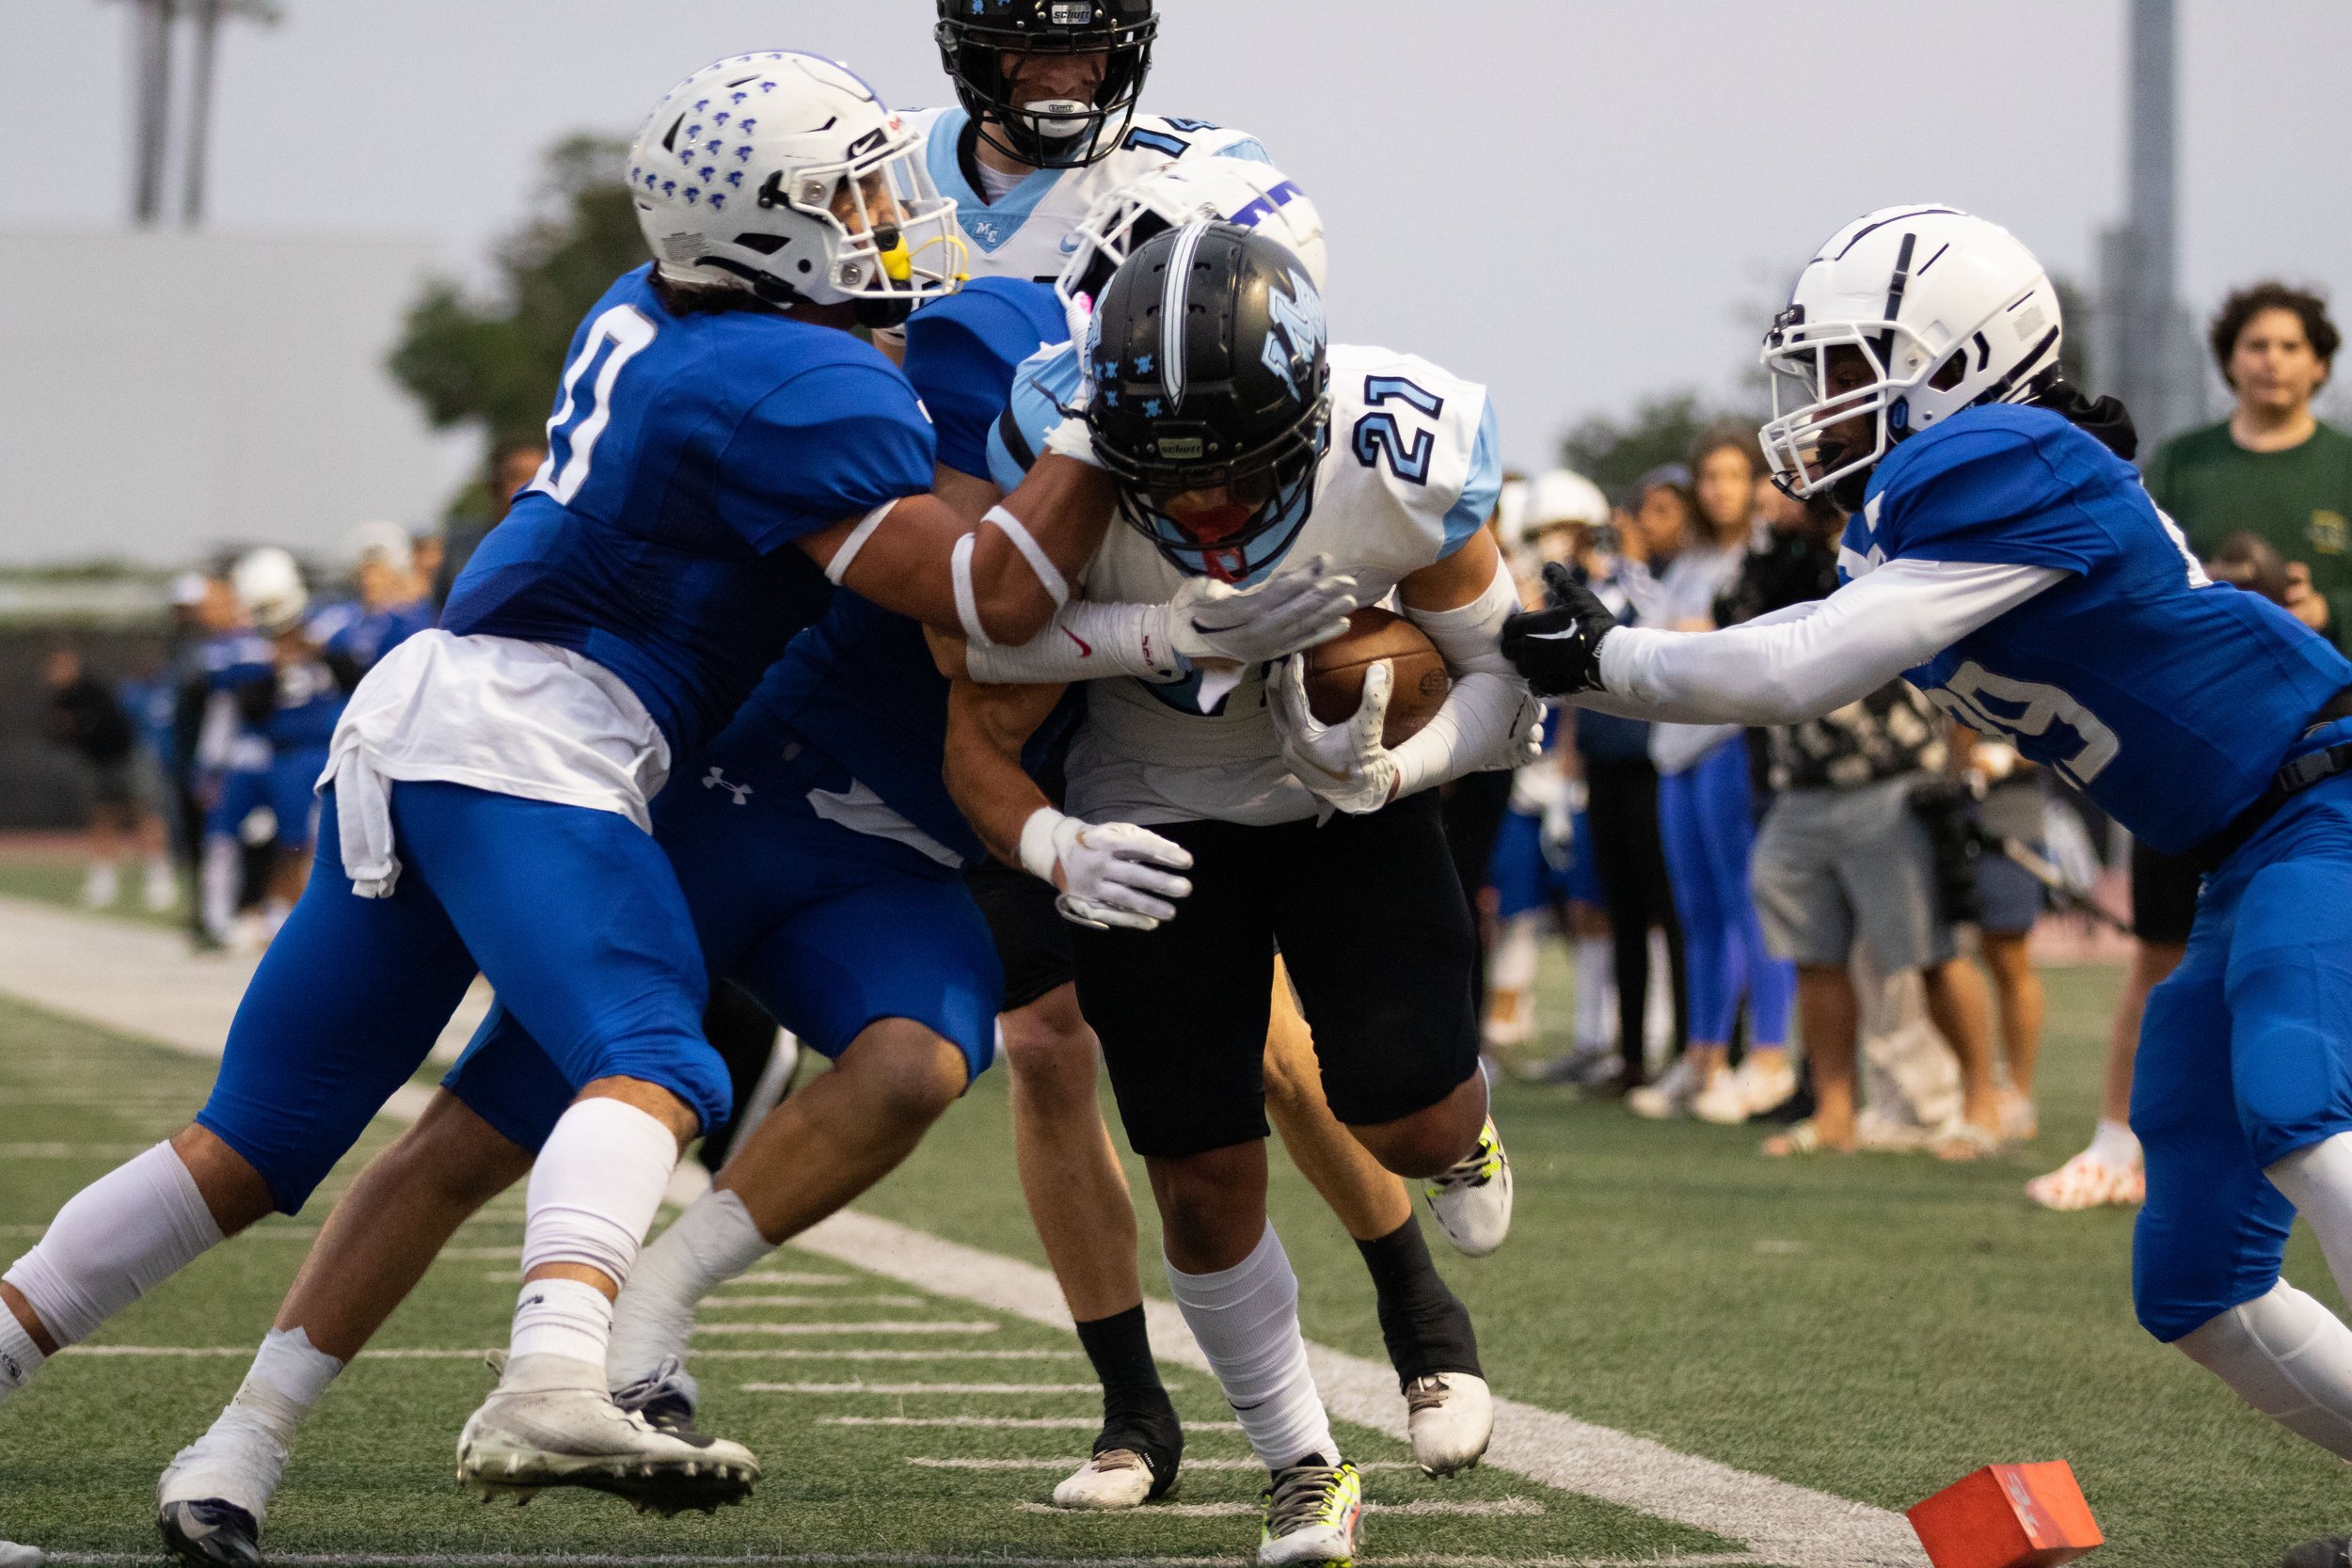  Santa Monica College Corsairs attempting to block Moorpark College Raider Gabe Landless (21) from scoring a touchdown during the first quarter of the game. The game on Thursday, Oct. 13, 2022 at Santa Monica College, Santa Monica, Calif. went in the